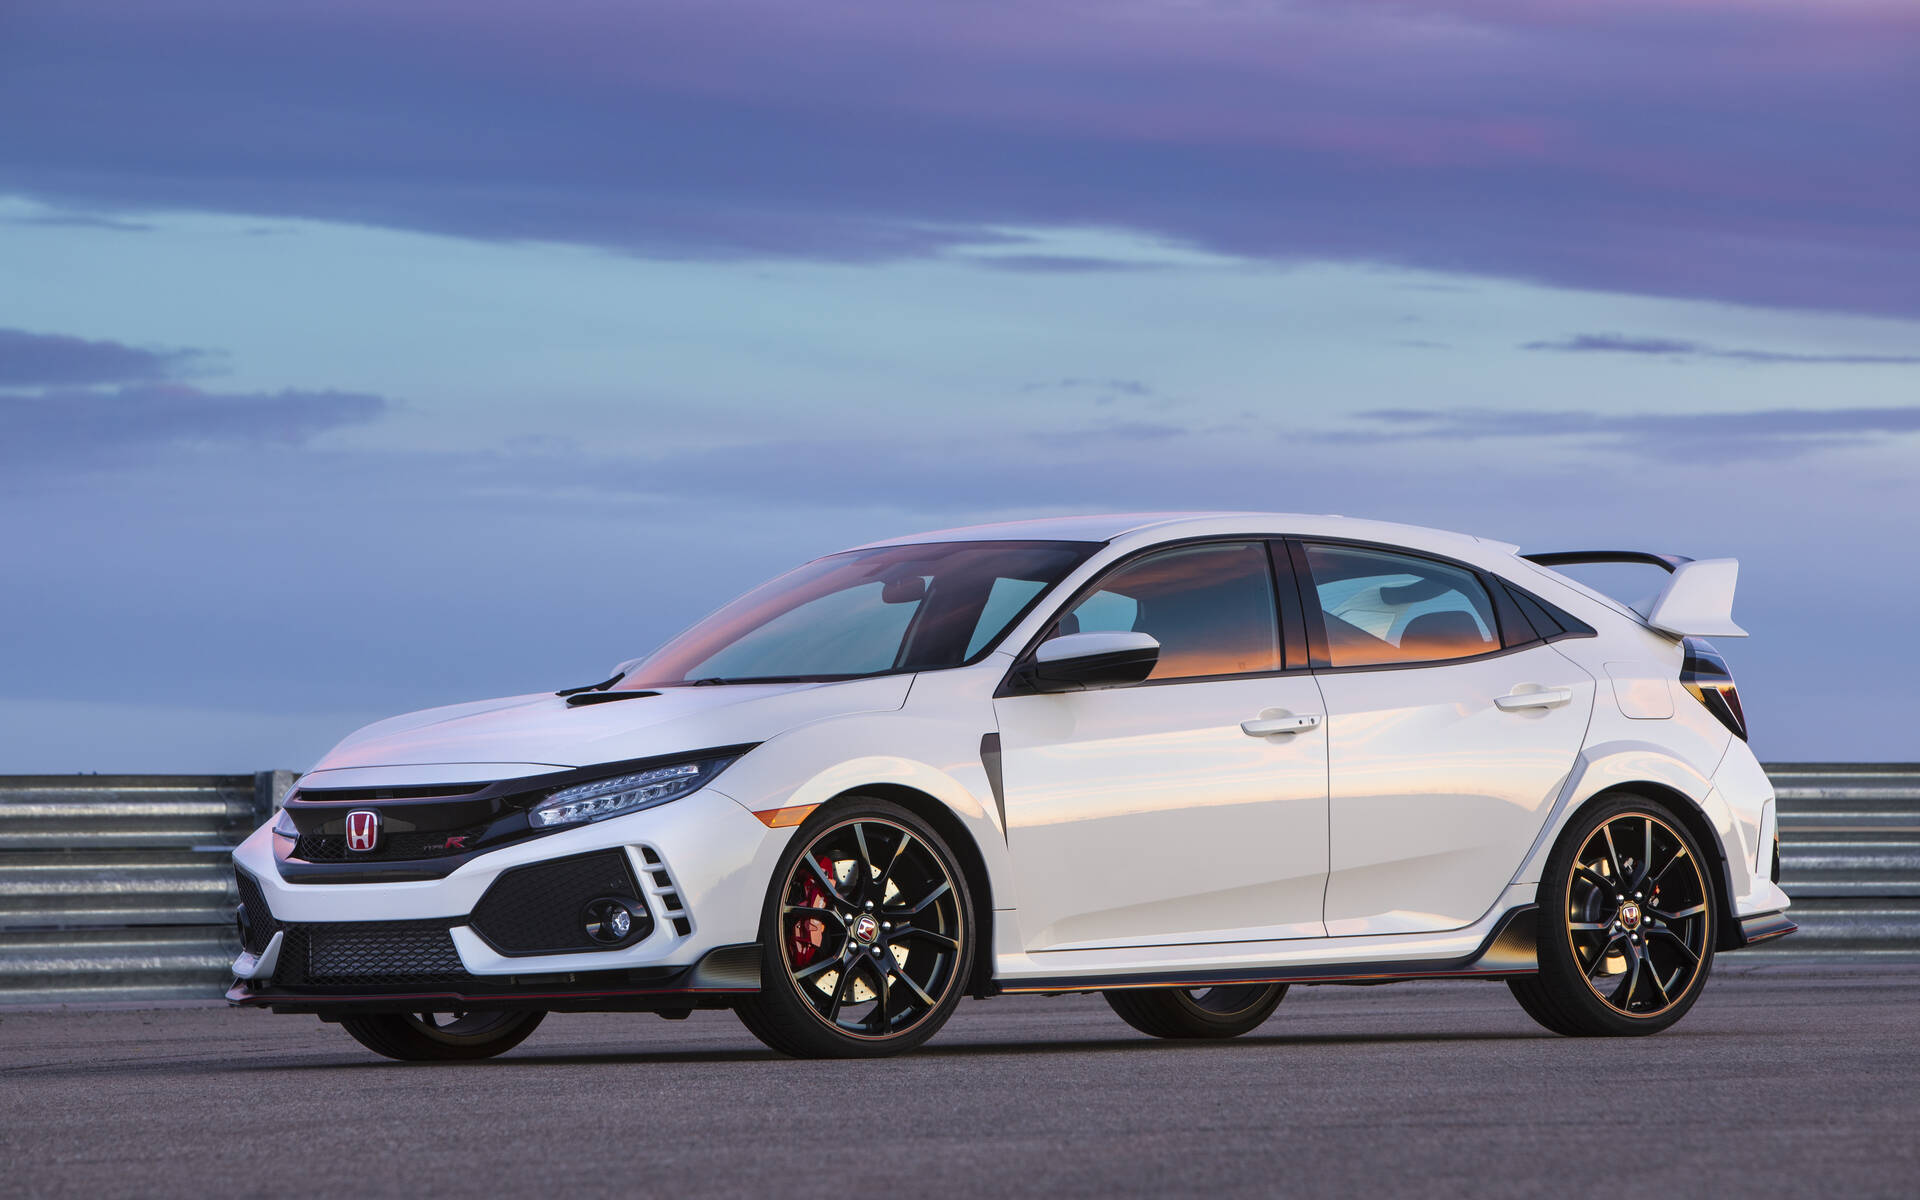 Pre-Owned Honda Civic: How Much Should You Pay? - The Car Guide